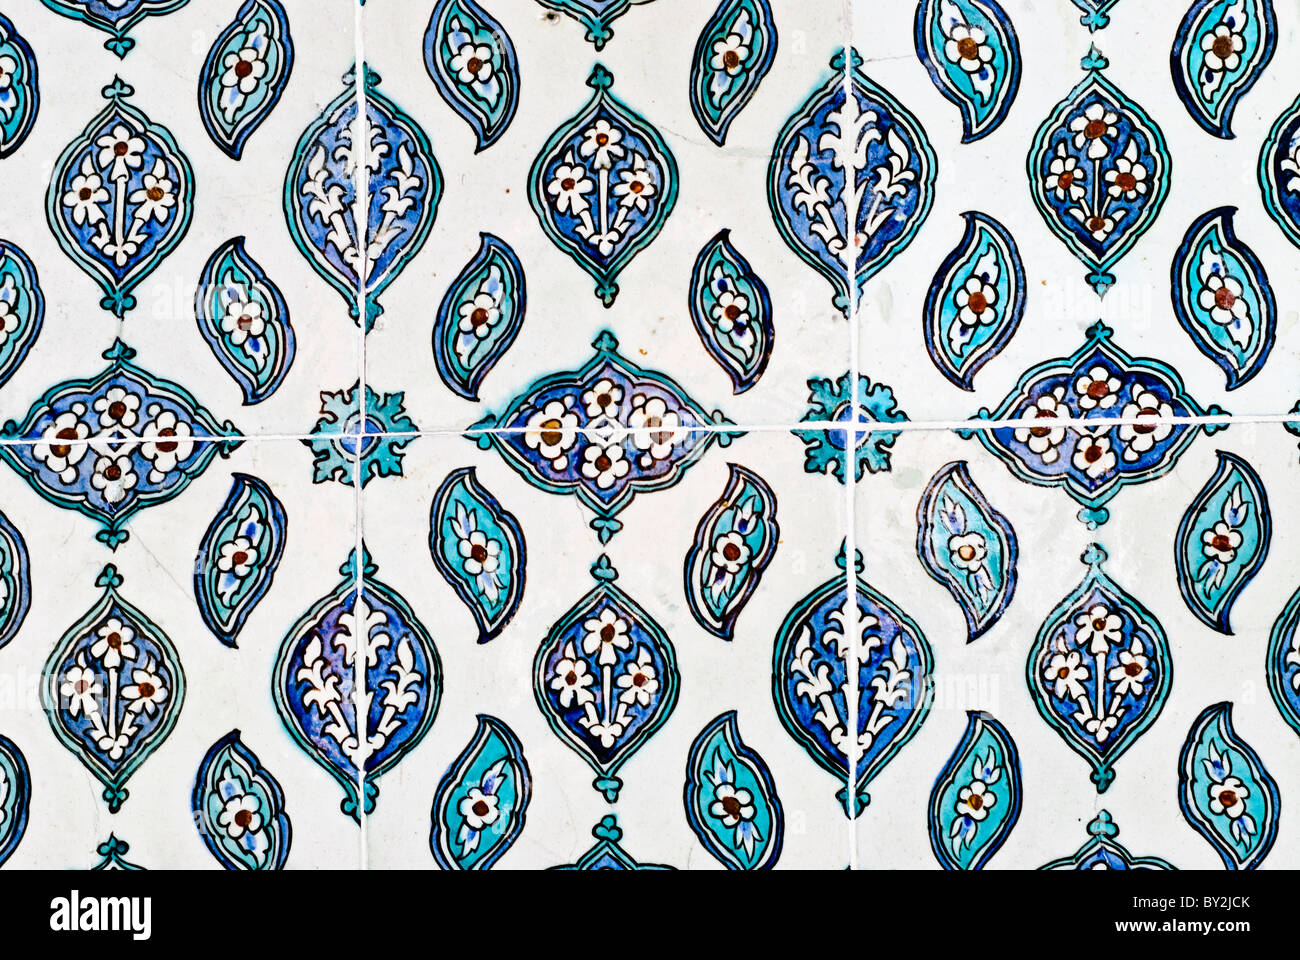 Ornate ceramic tiles lining the walls of the Audience Chamber (also known as the Chamber of Petitions) (in Turkish: Arz Odası). This served as the main throne room of the Topkapi Palace. Stock Photo